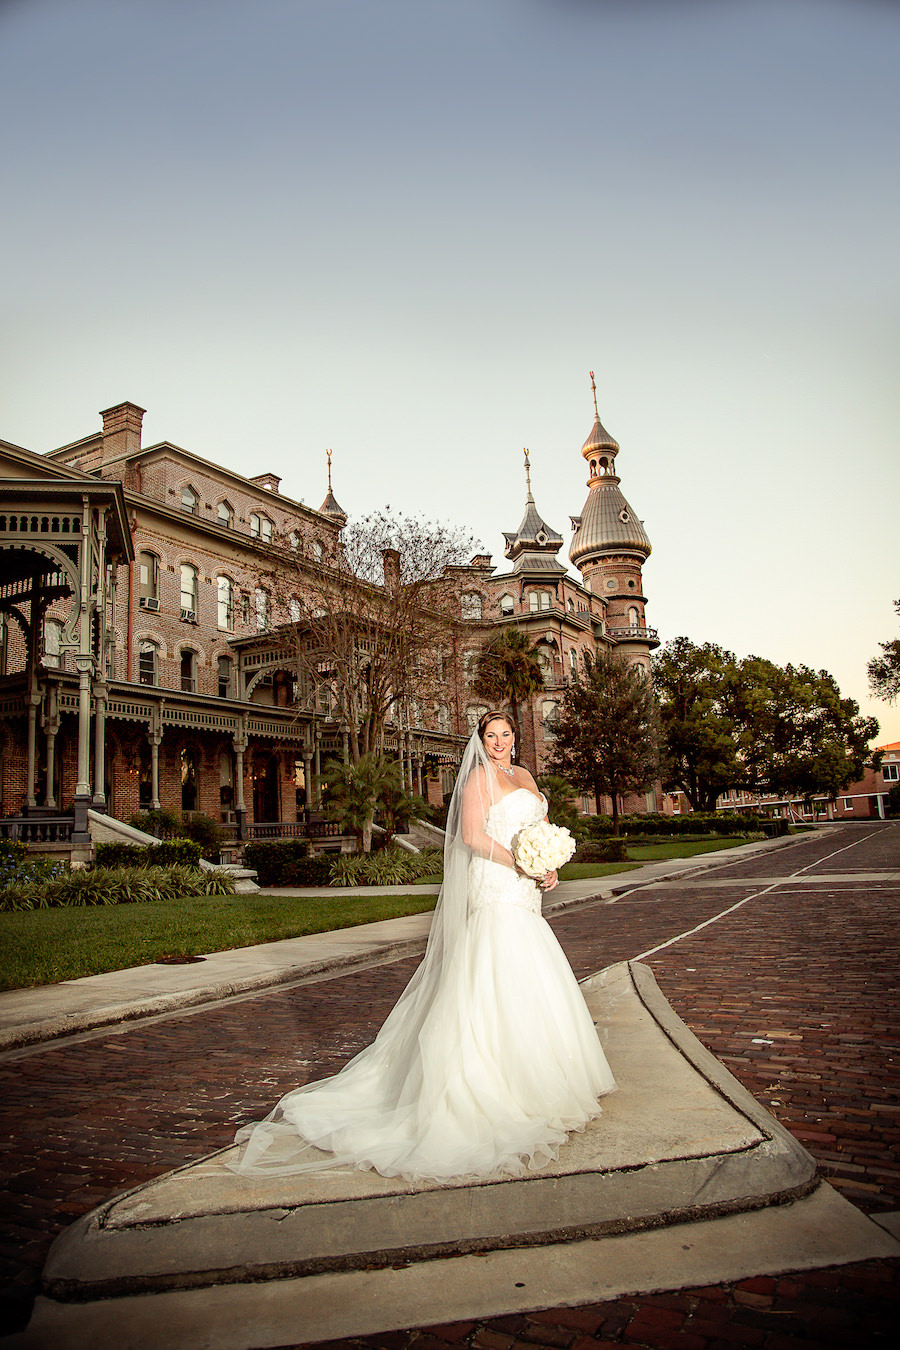 Outdoor, Bridal Wedding Portrait in Strapless, Ivory Wedding Dress and Ivory Bridal Bouquet | Downtown Tampa Wedding Venue University of Tampa